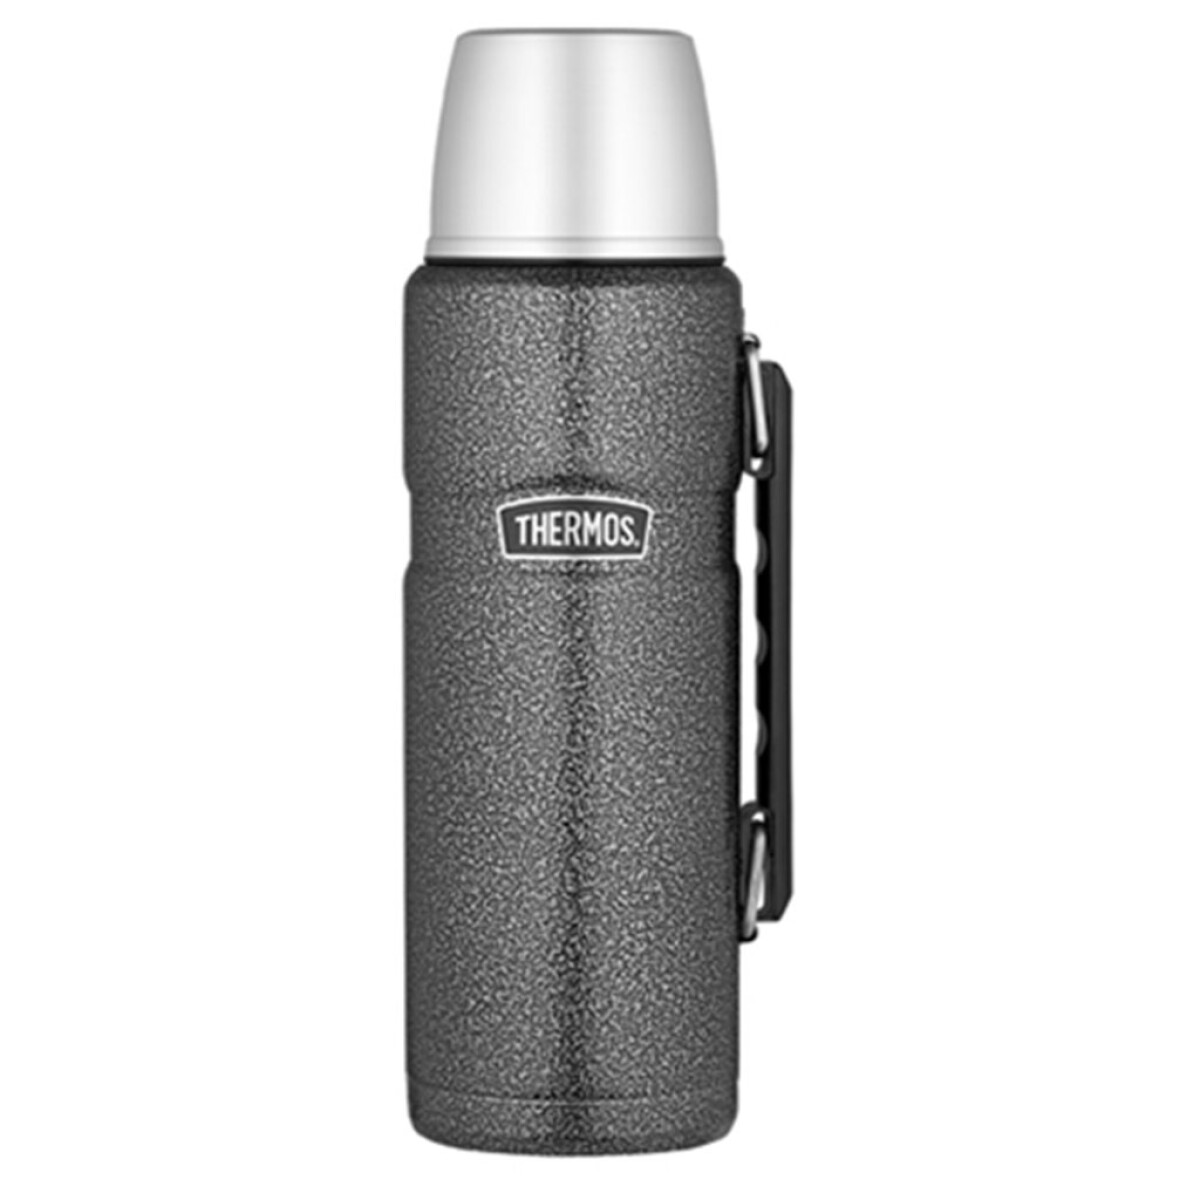 TERMO 1.2L STAINLESS KING ACERO INOXIDABLE HAMMER THERMOS 